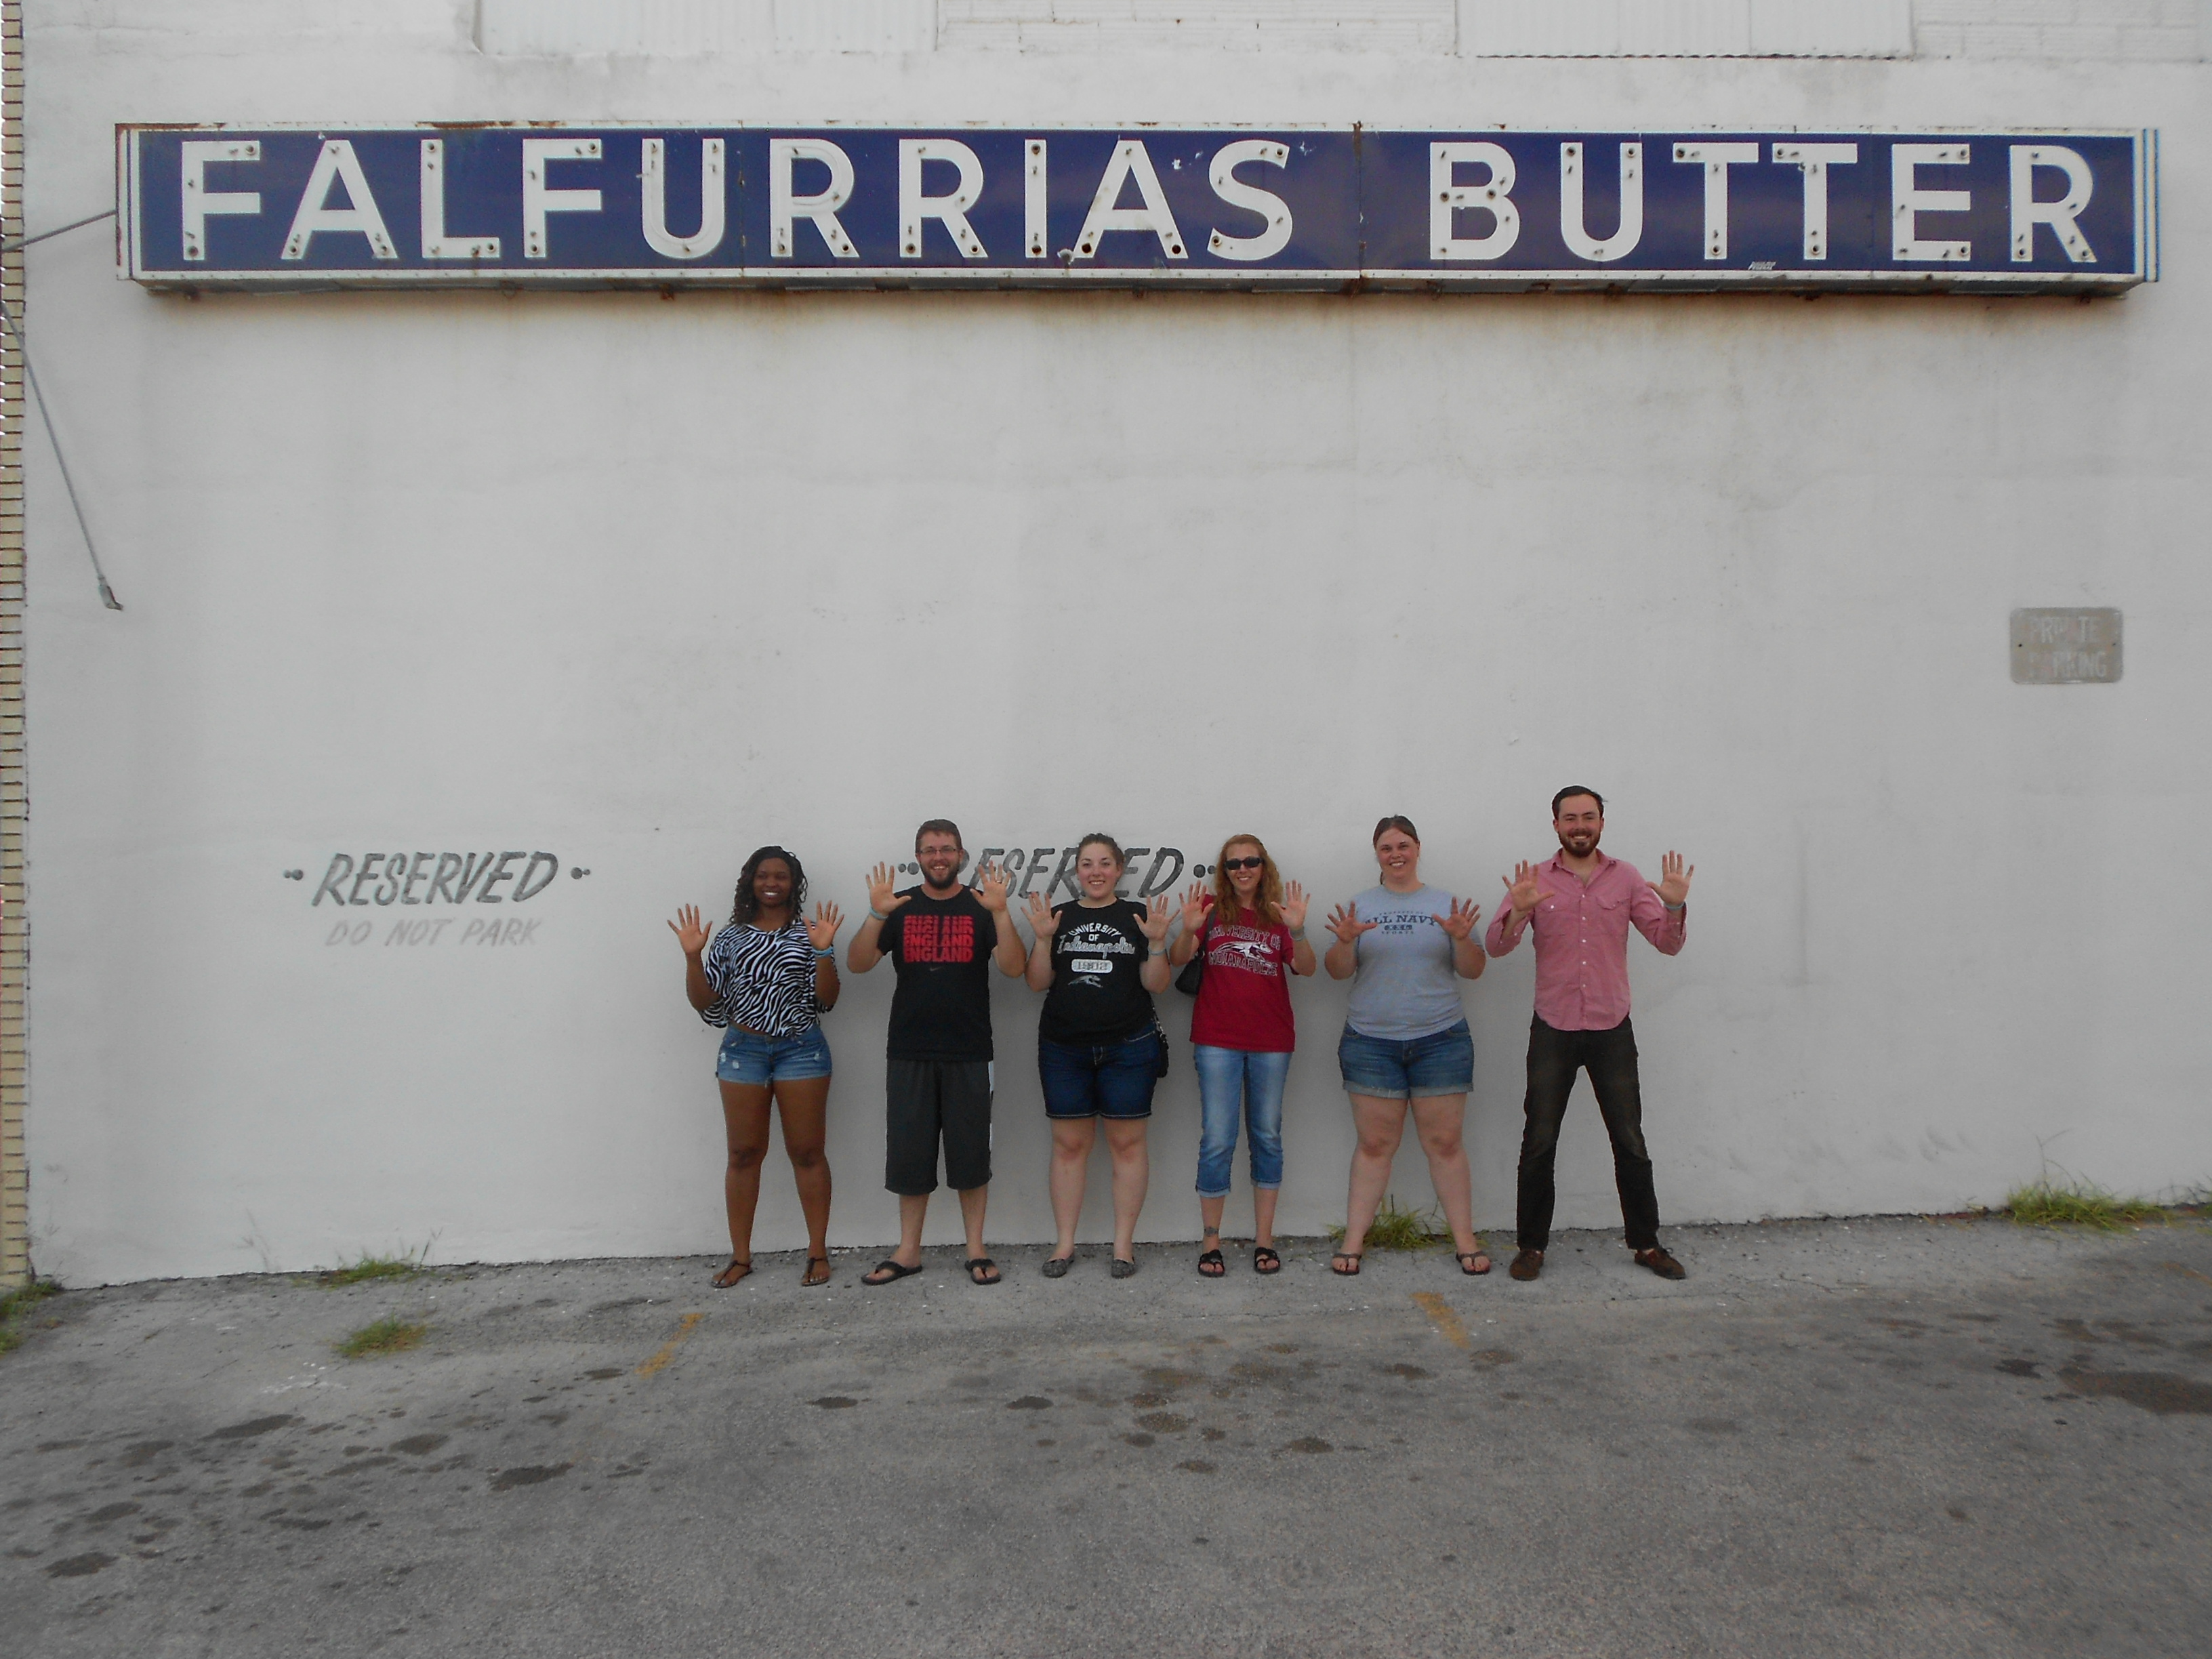 Group picture under a Falfurrias Butter sign with the members holding up ten fingers